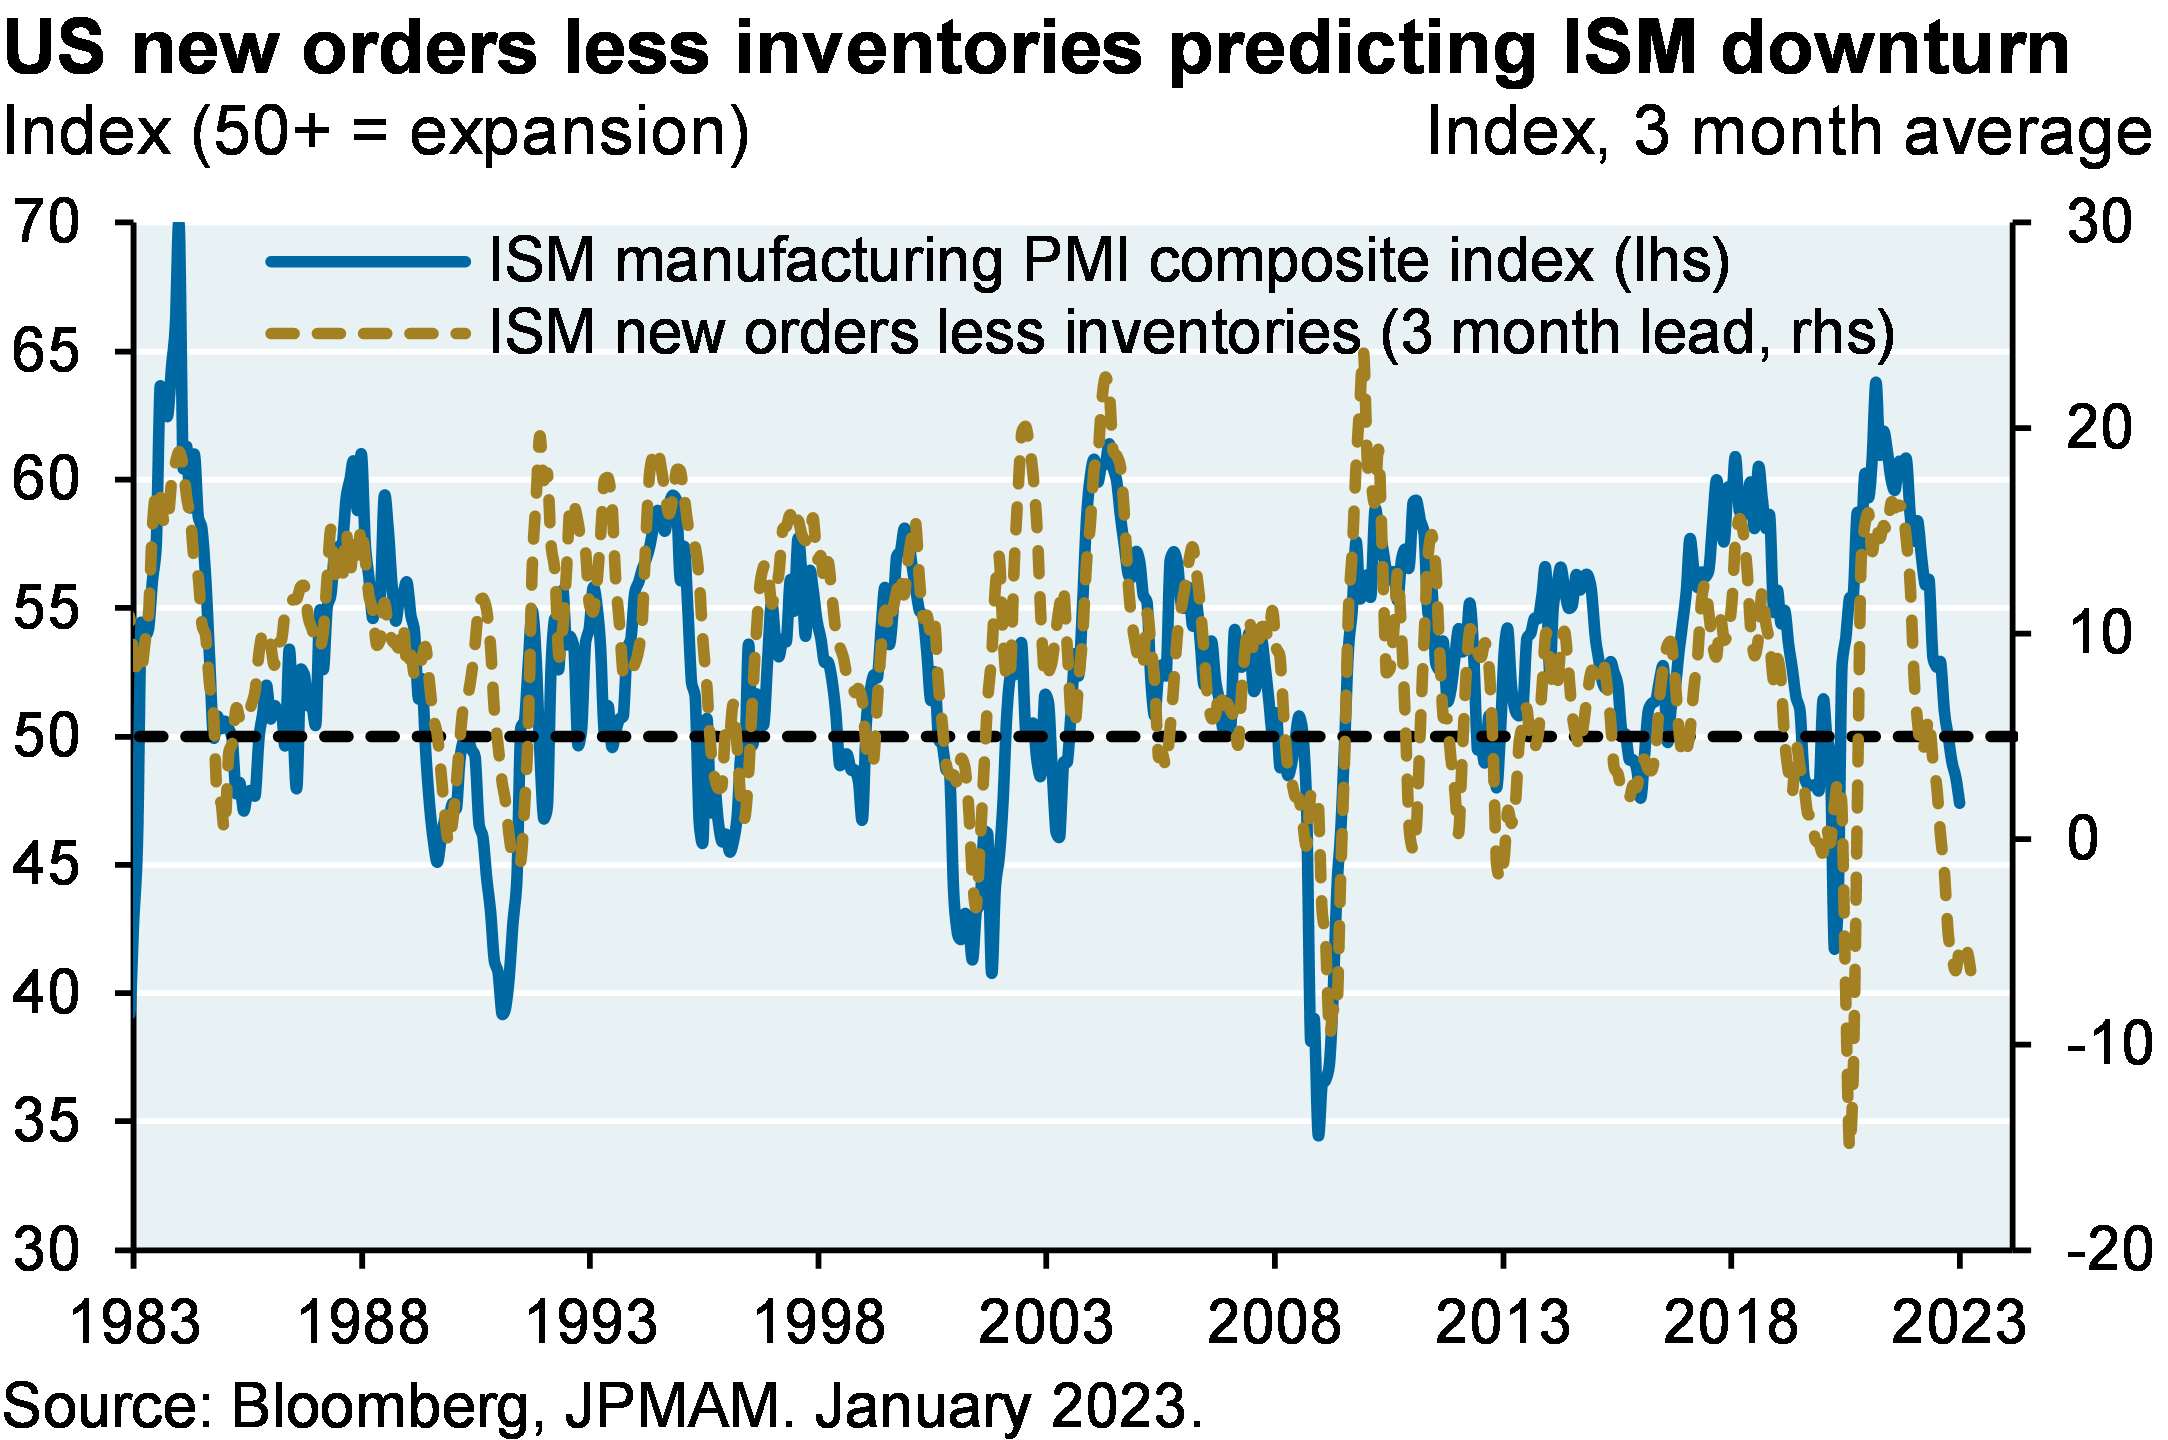 US new orders less inventories predicting ISM downturn